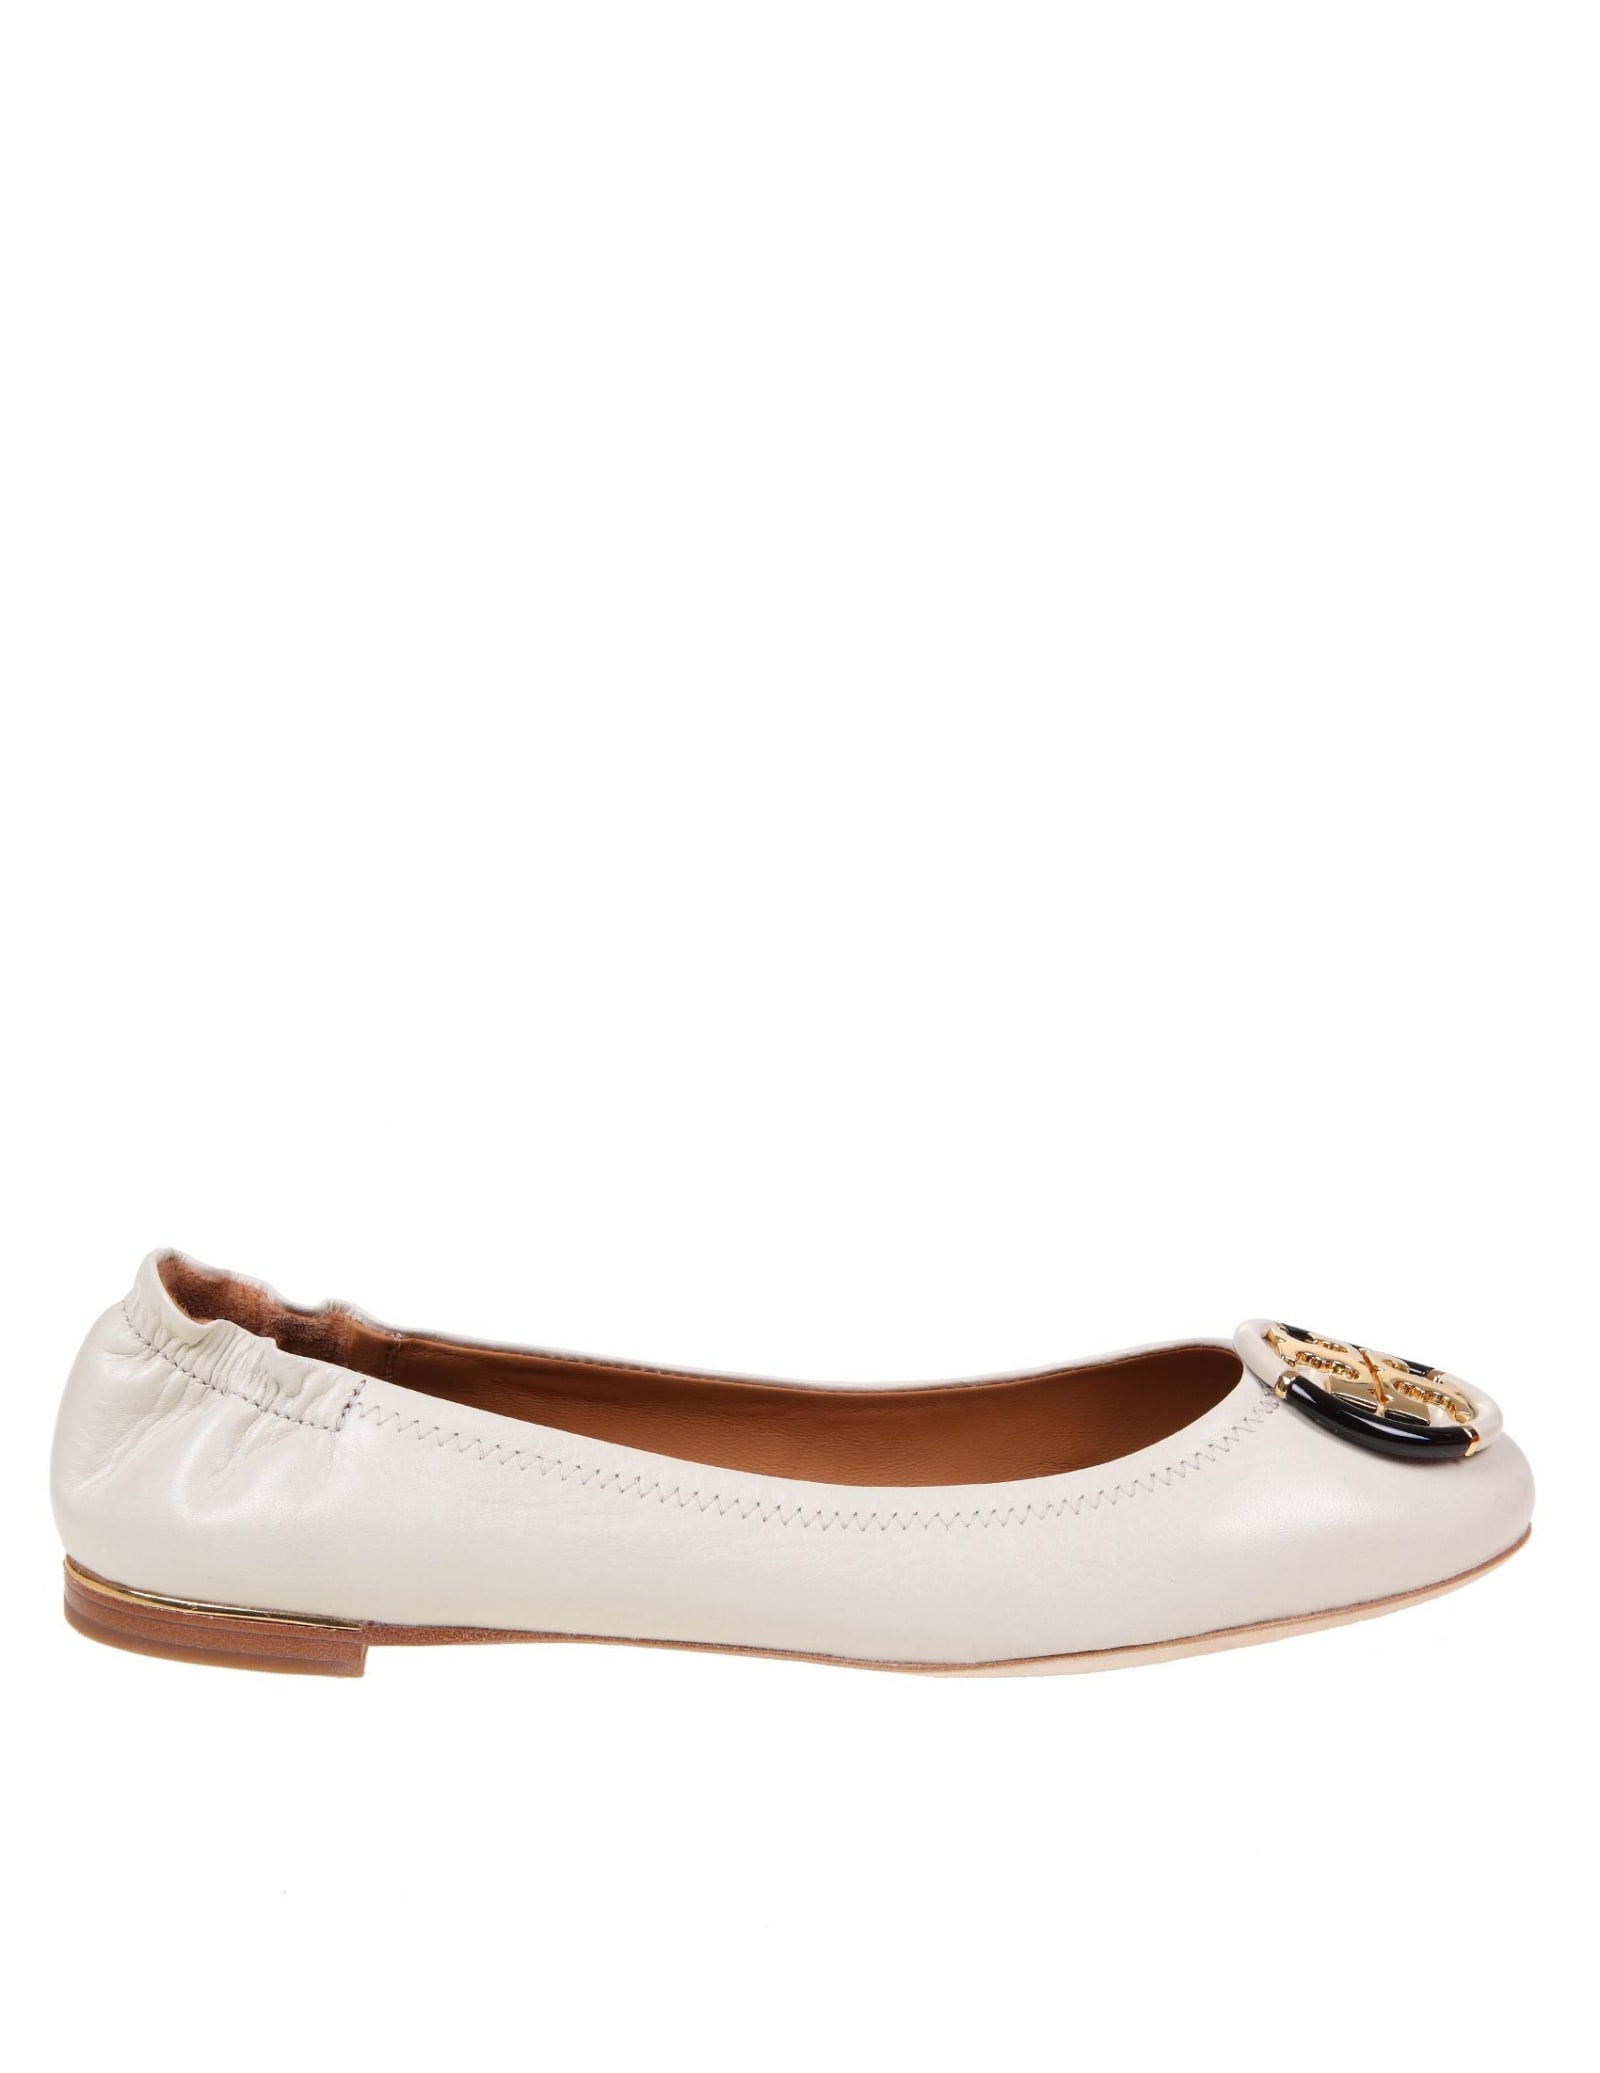 Buy Tory Burch Ballerina Multi Logo In Ivory Color Leather online, shop Tory Burch shoes with free shipping